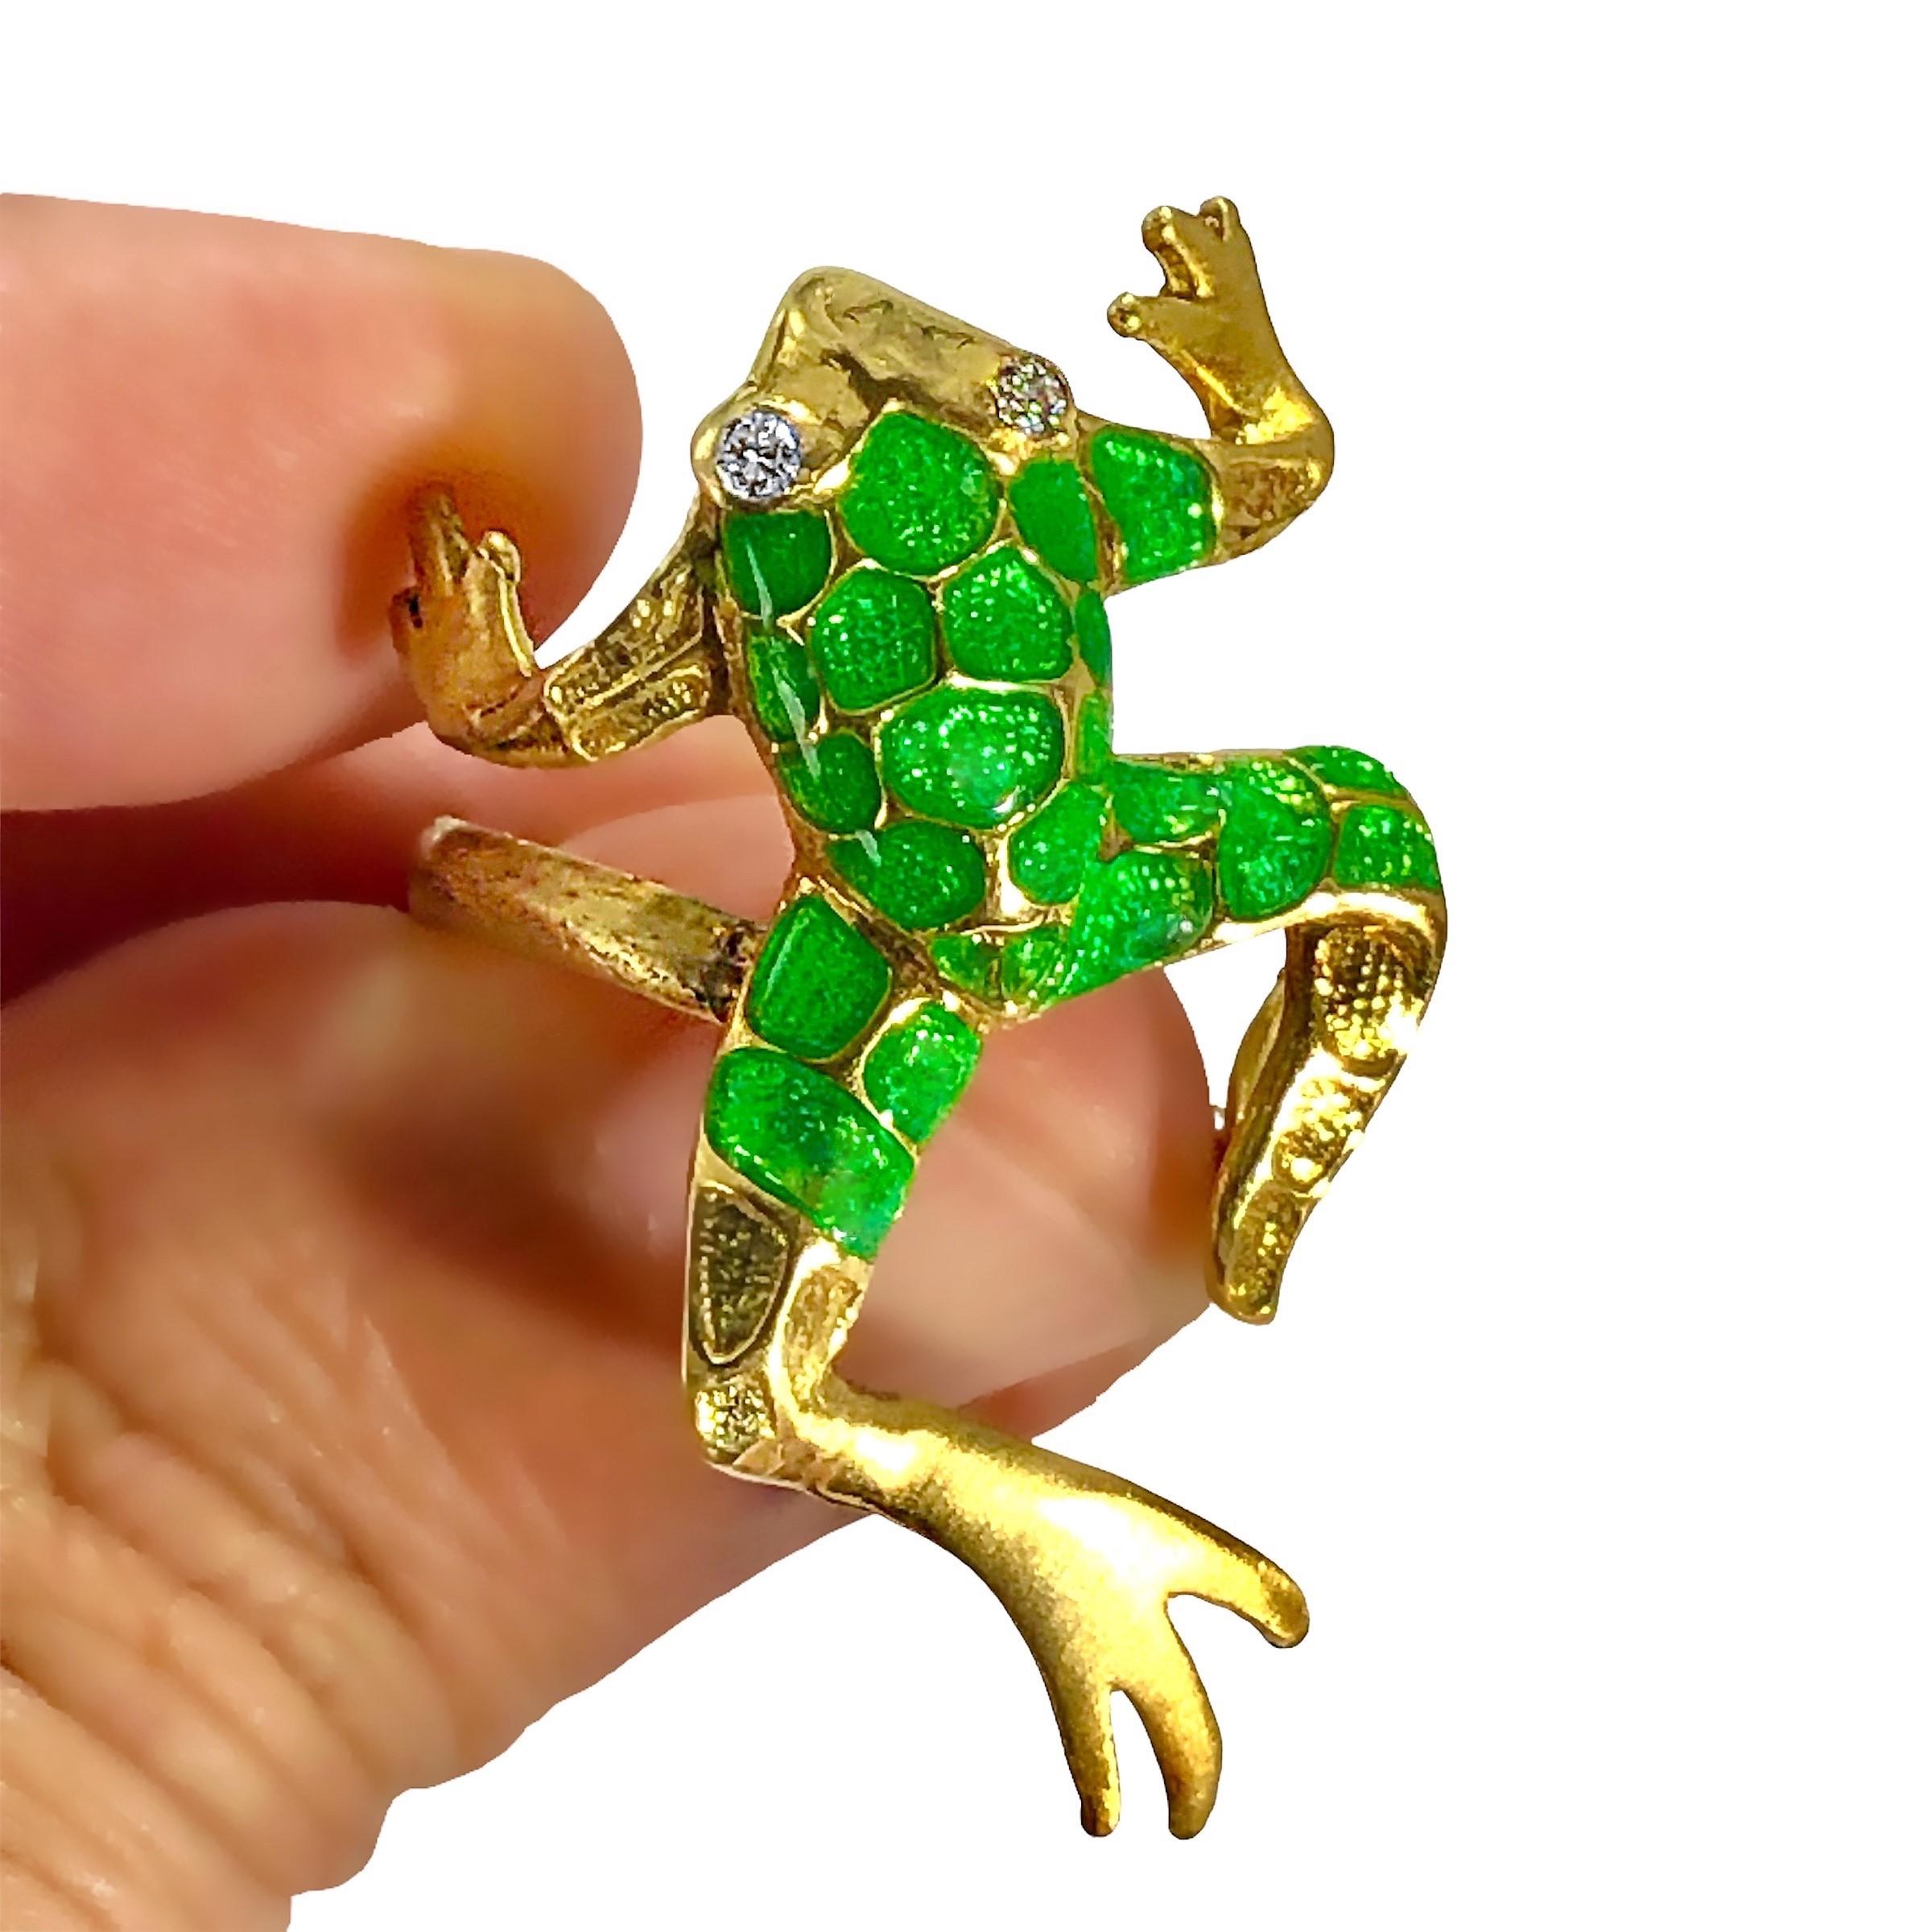 Contemporary Lifelike Frog Motif Ring in 18K Yellow Gold, Green Enamel and Diamonds For Sale